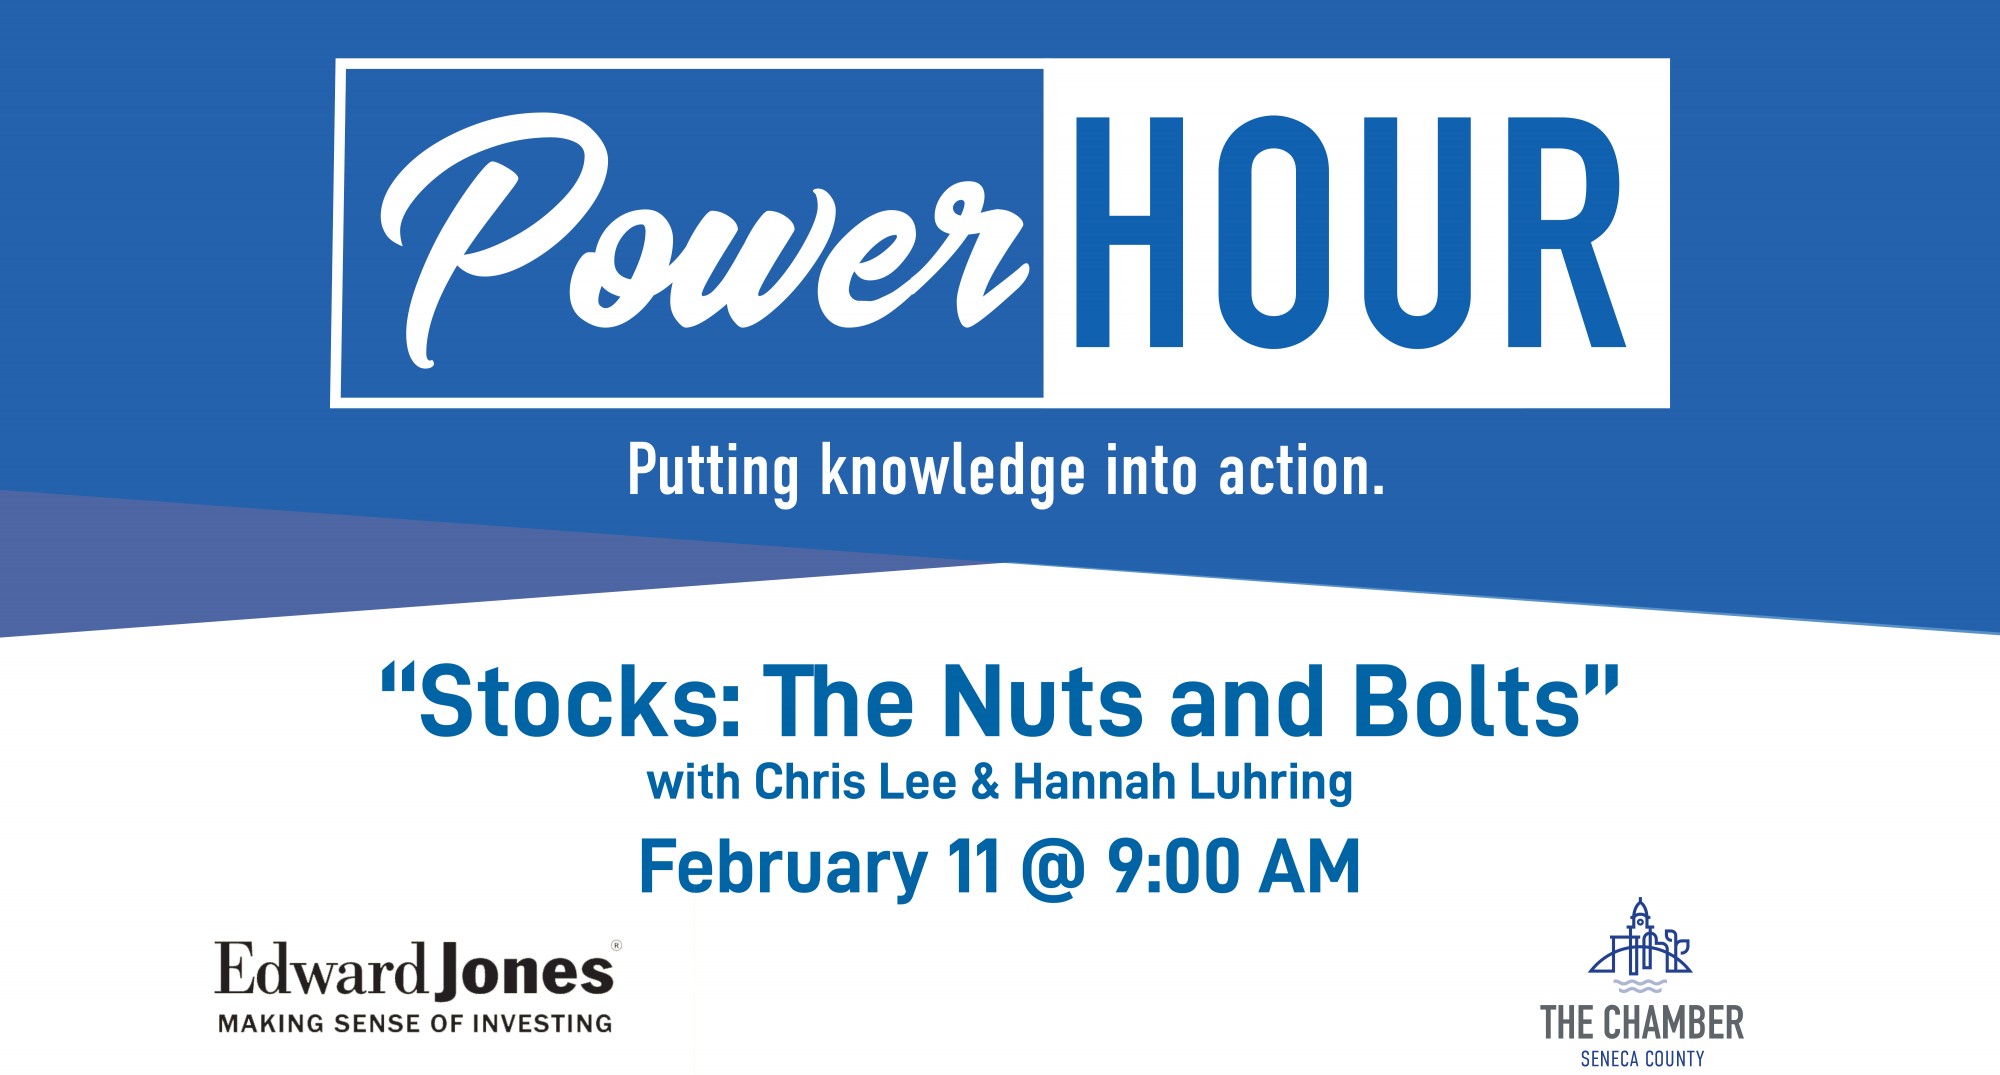 Power Hour:  "Stocks:  The Nuts and Bolts"